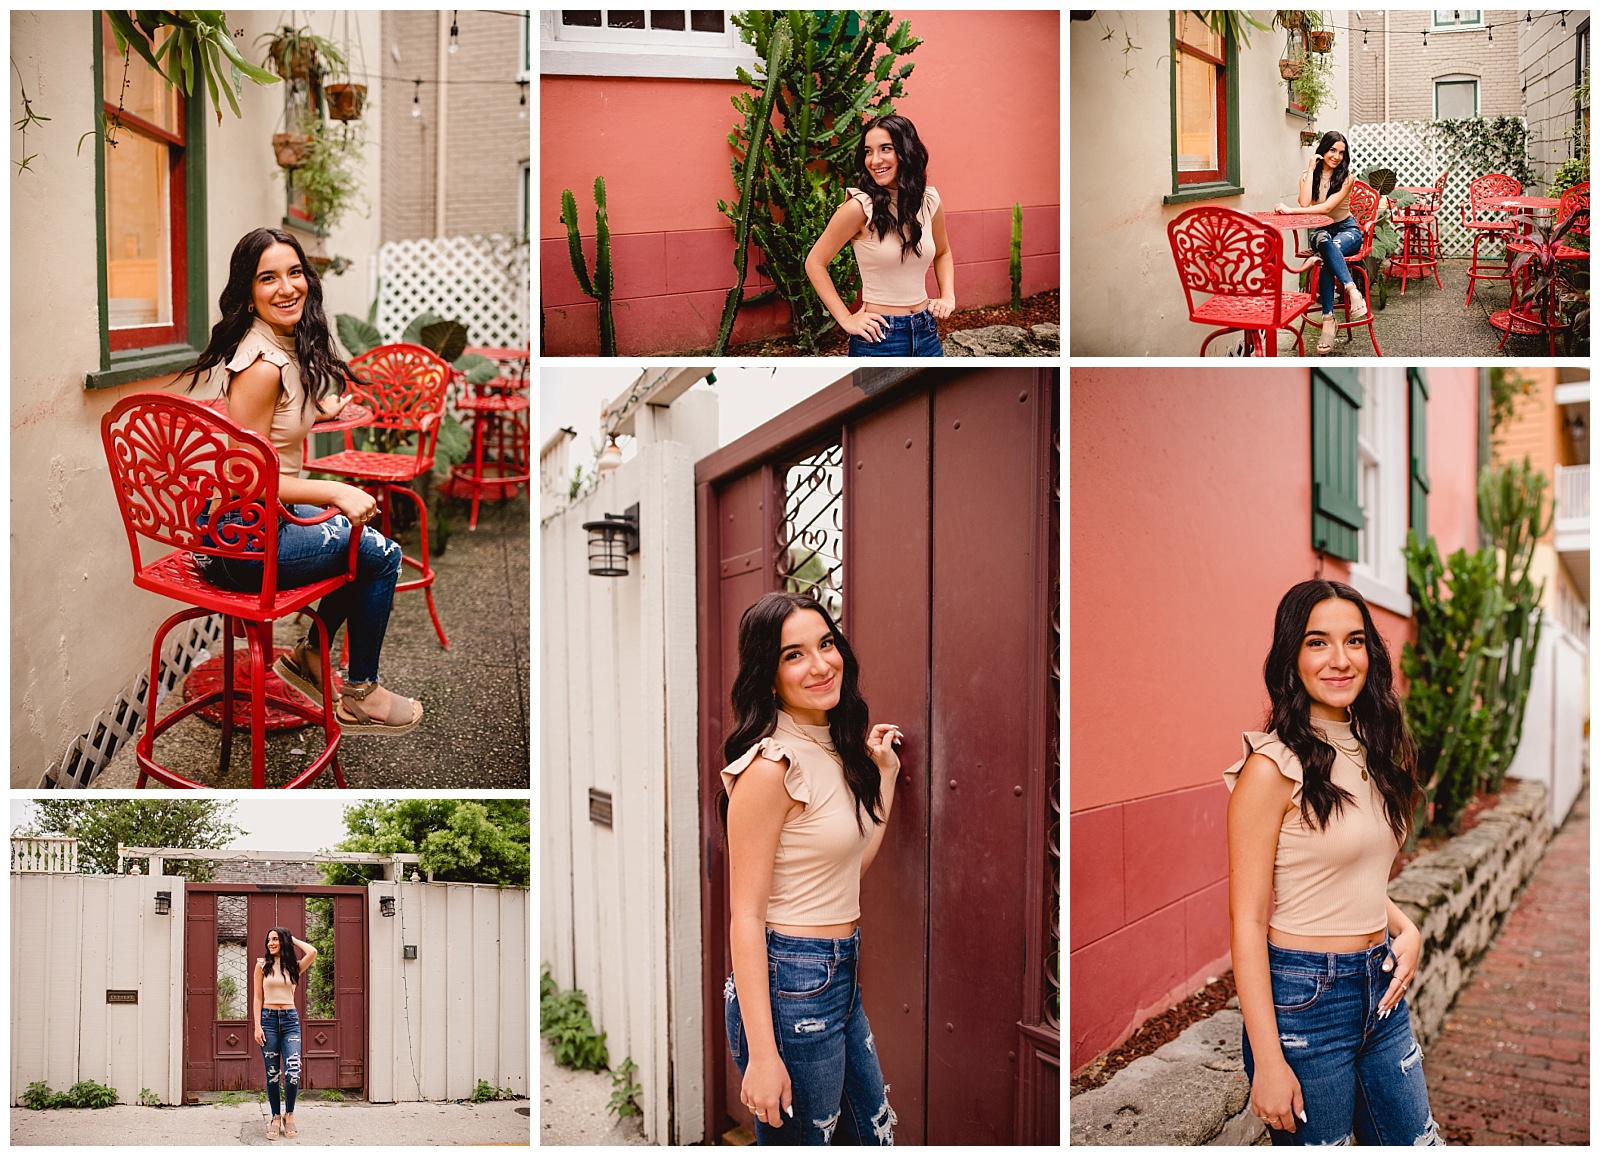 Downtown st augustine is a great backdrop for senior pictures.